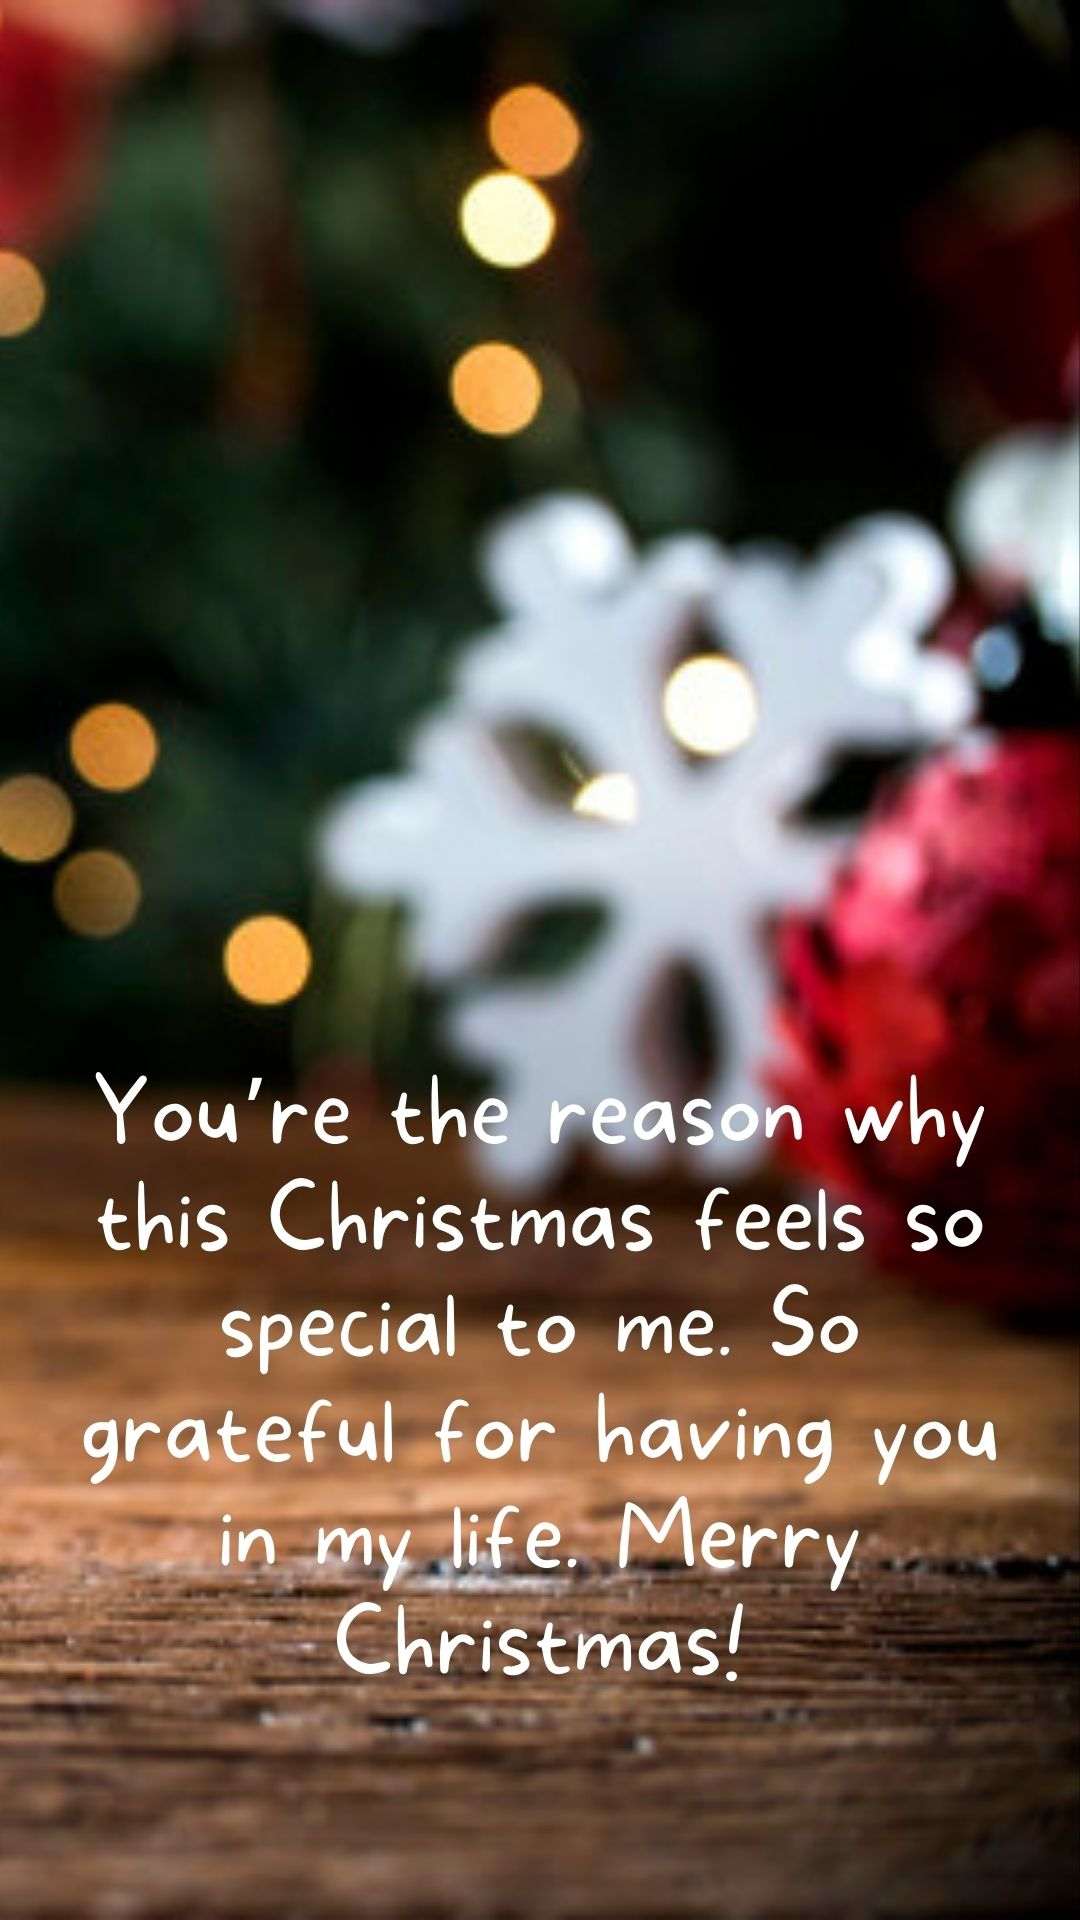 "At Christmas and always, what a blessing you are. Thinking of you with